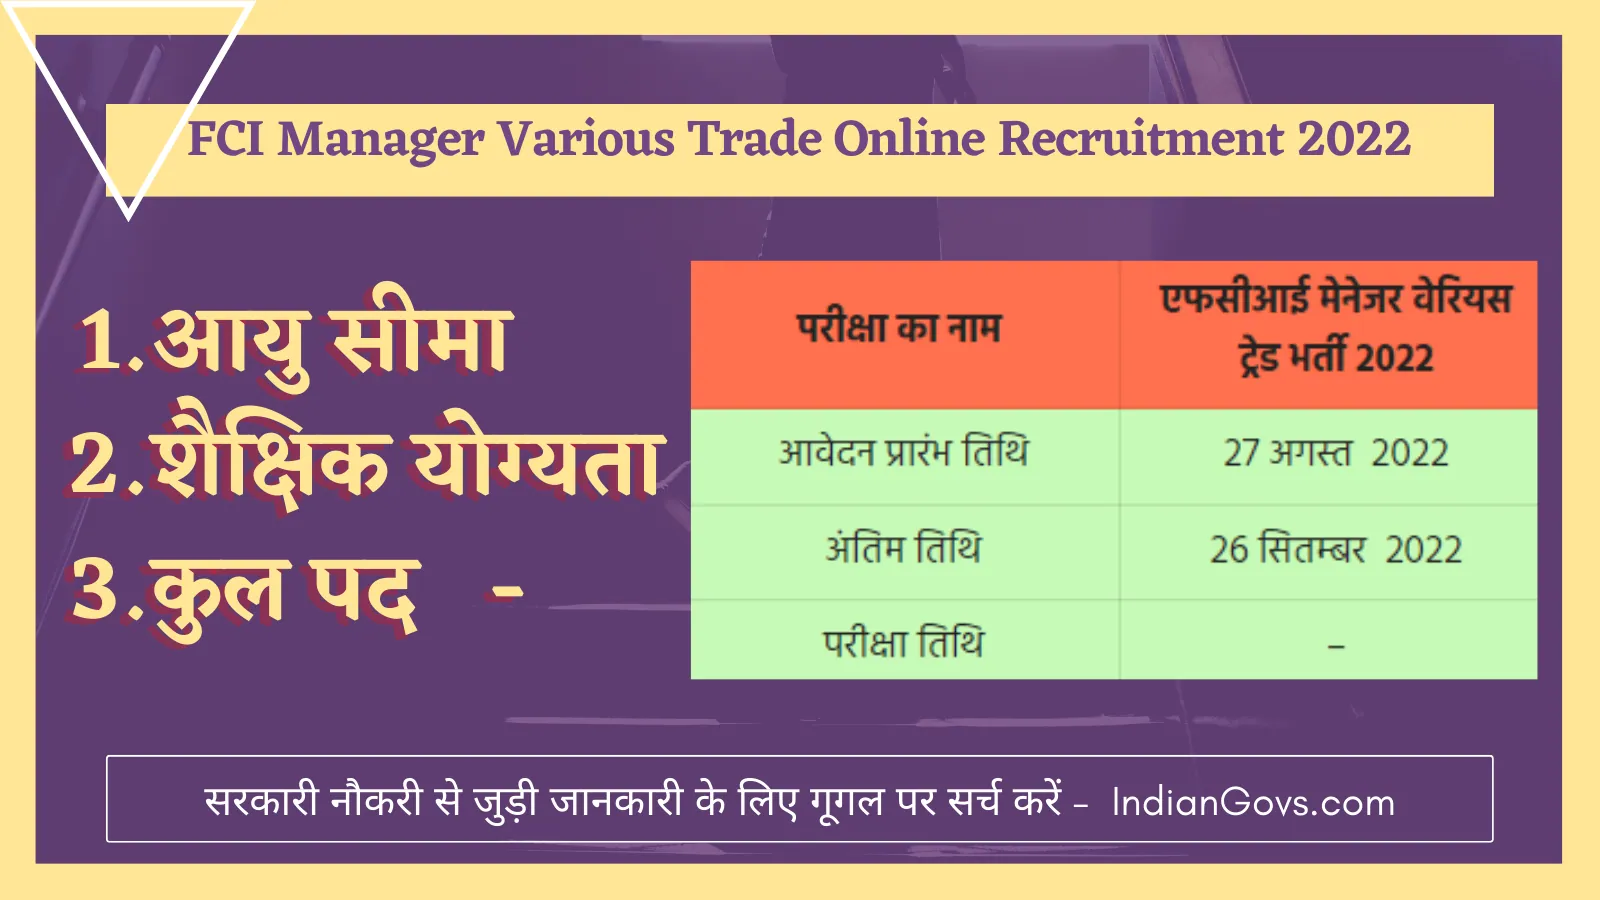 FCI Manager Various Trade Online Recruitment 2022